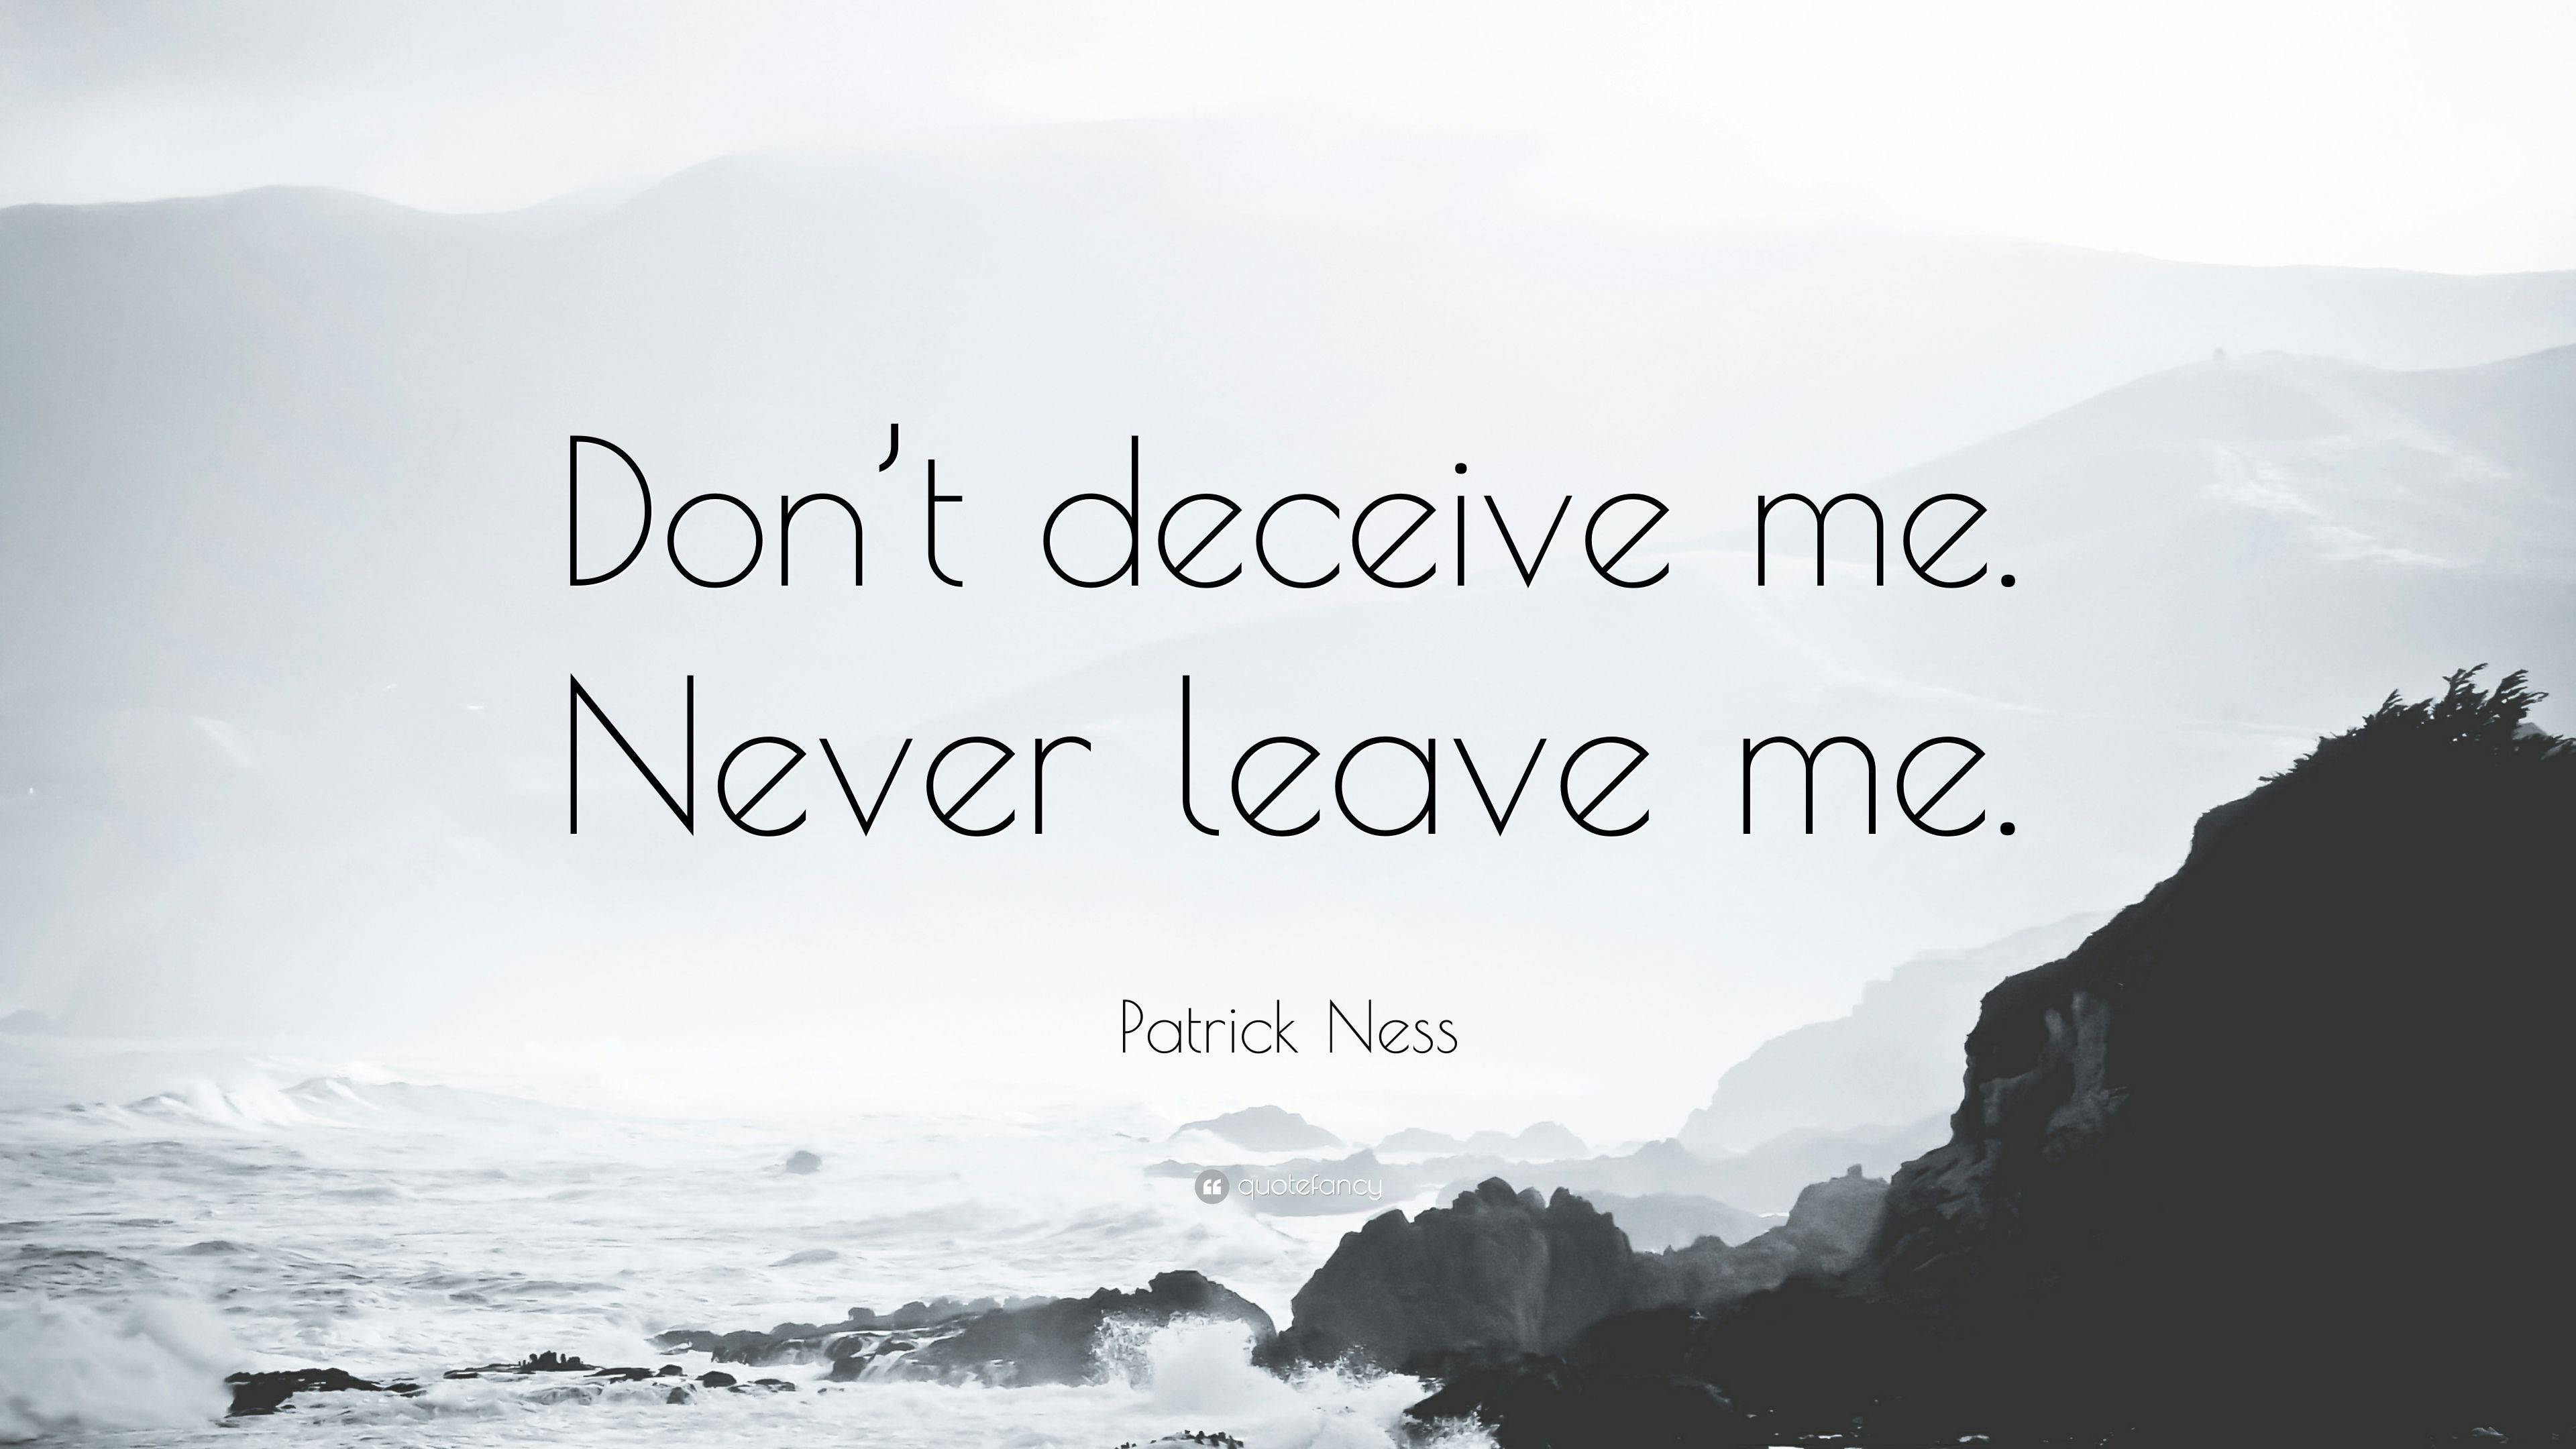 Patrick Ness Quote: “Don't deceive me. Never leave me.” 12